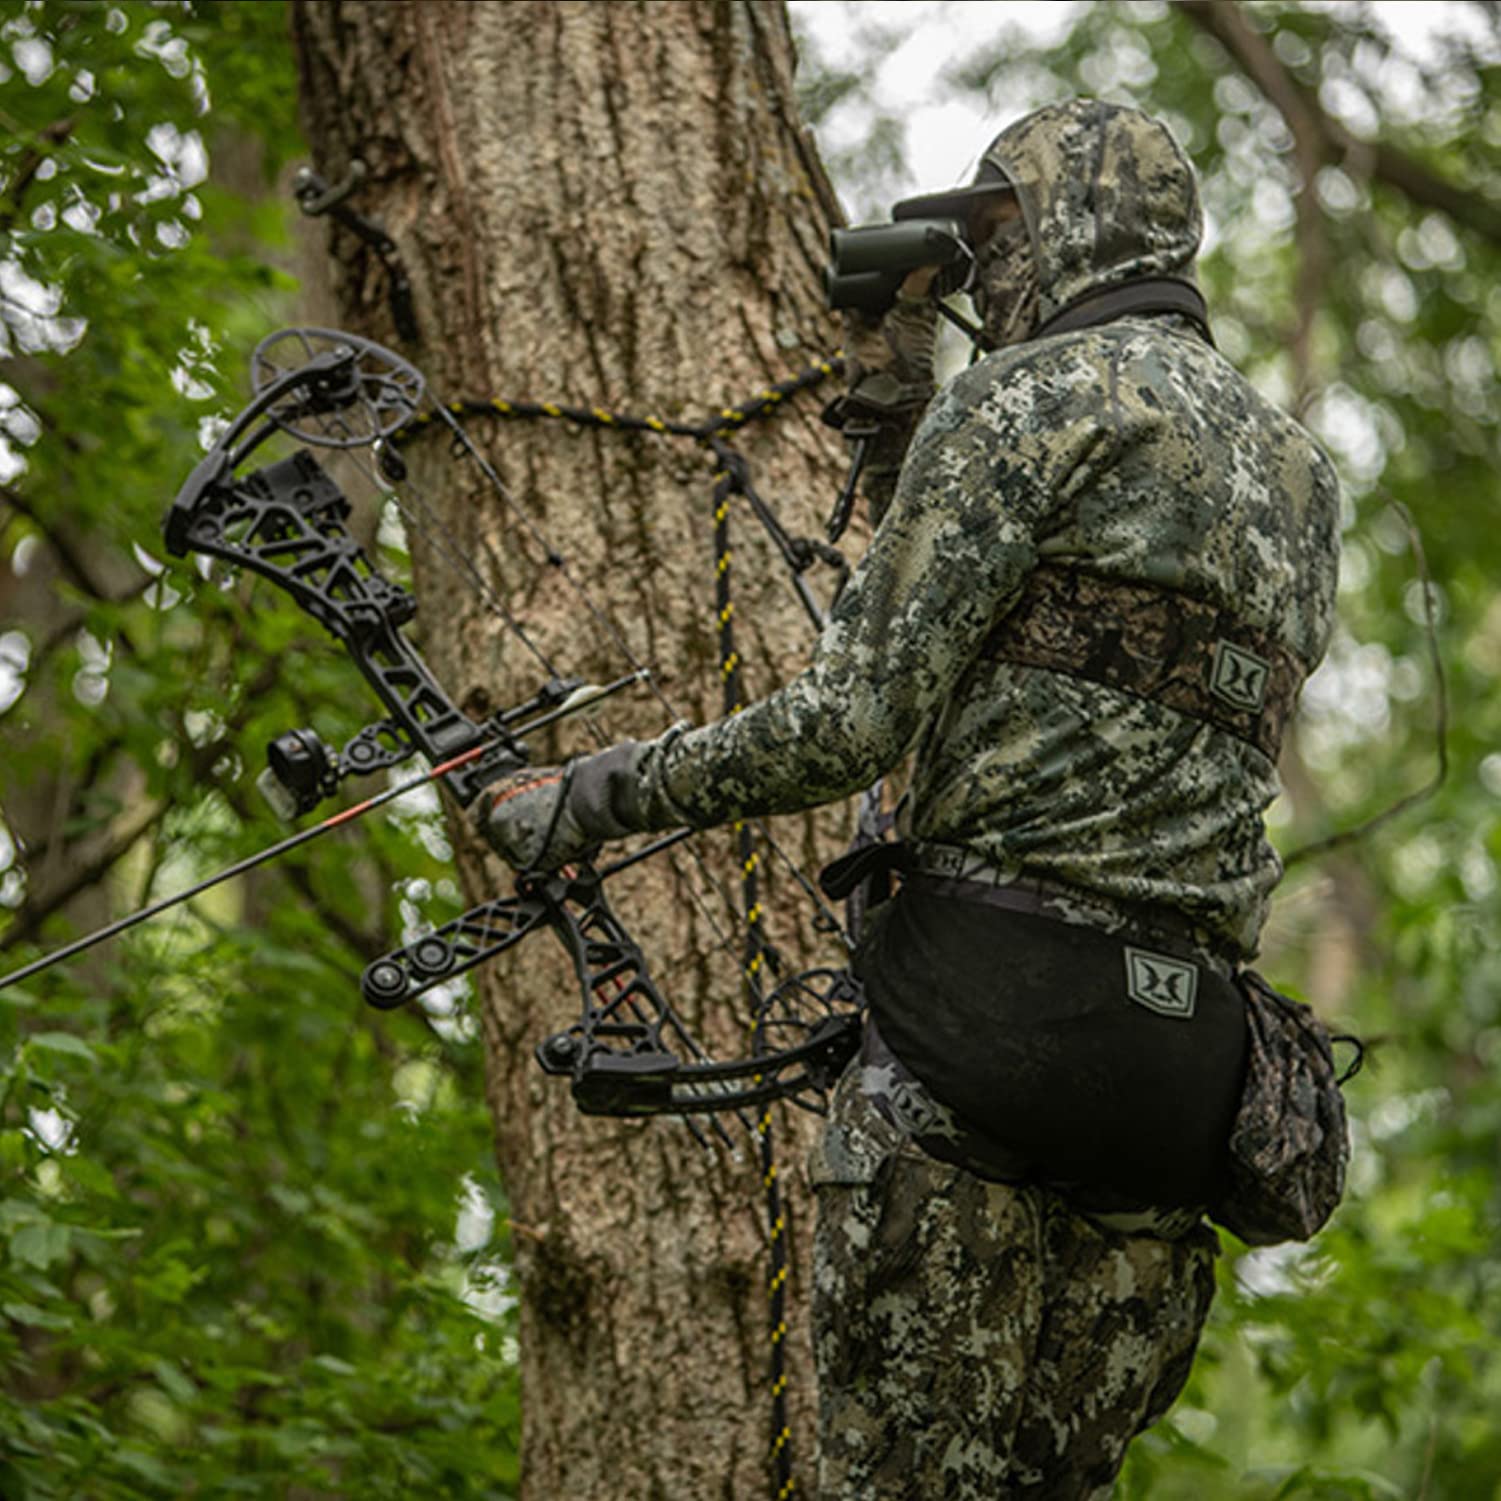 Hawk Helium Hammock Lightweight Packable Comfortable Camo Hunting Tree Saddle with Removable Padded Seat